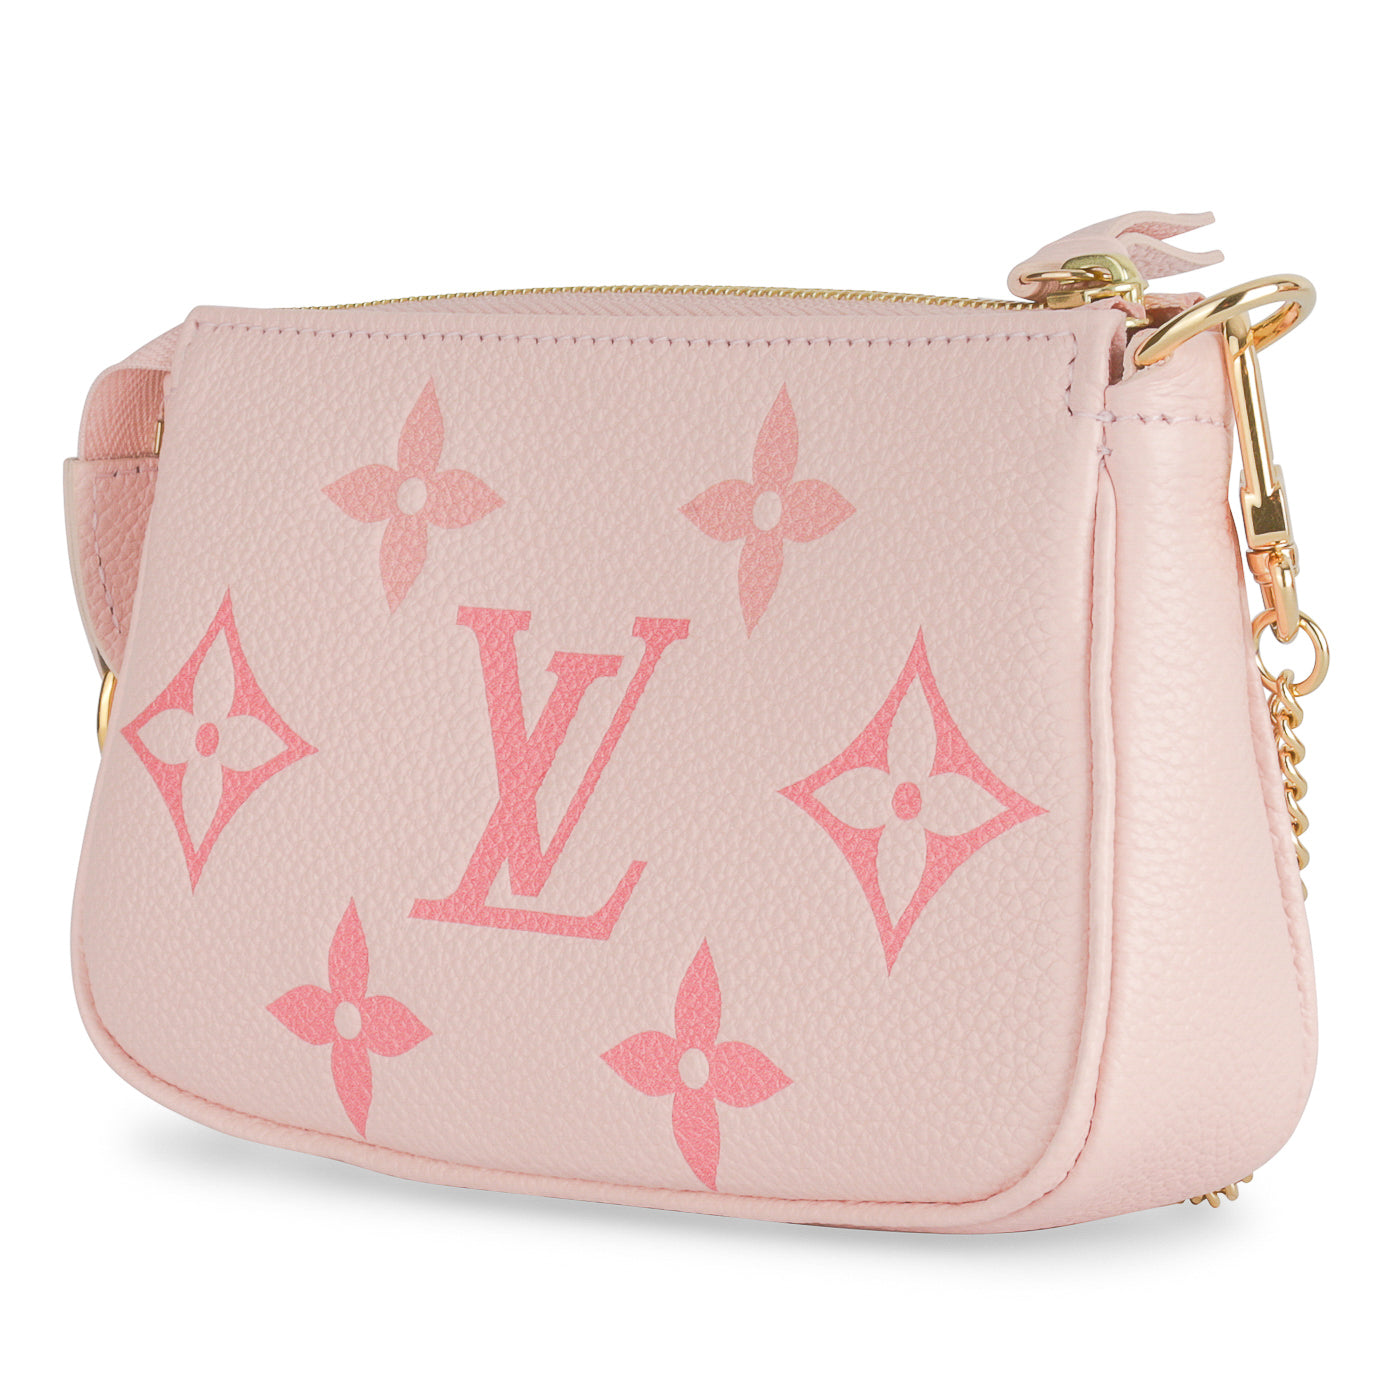 lv by the pool pink